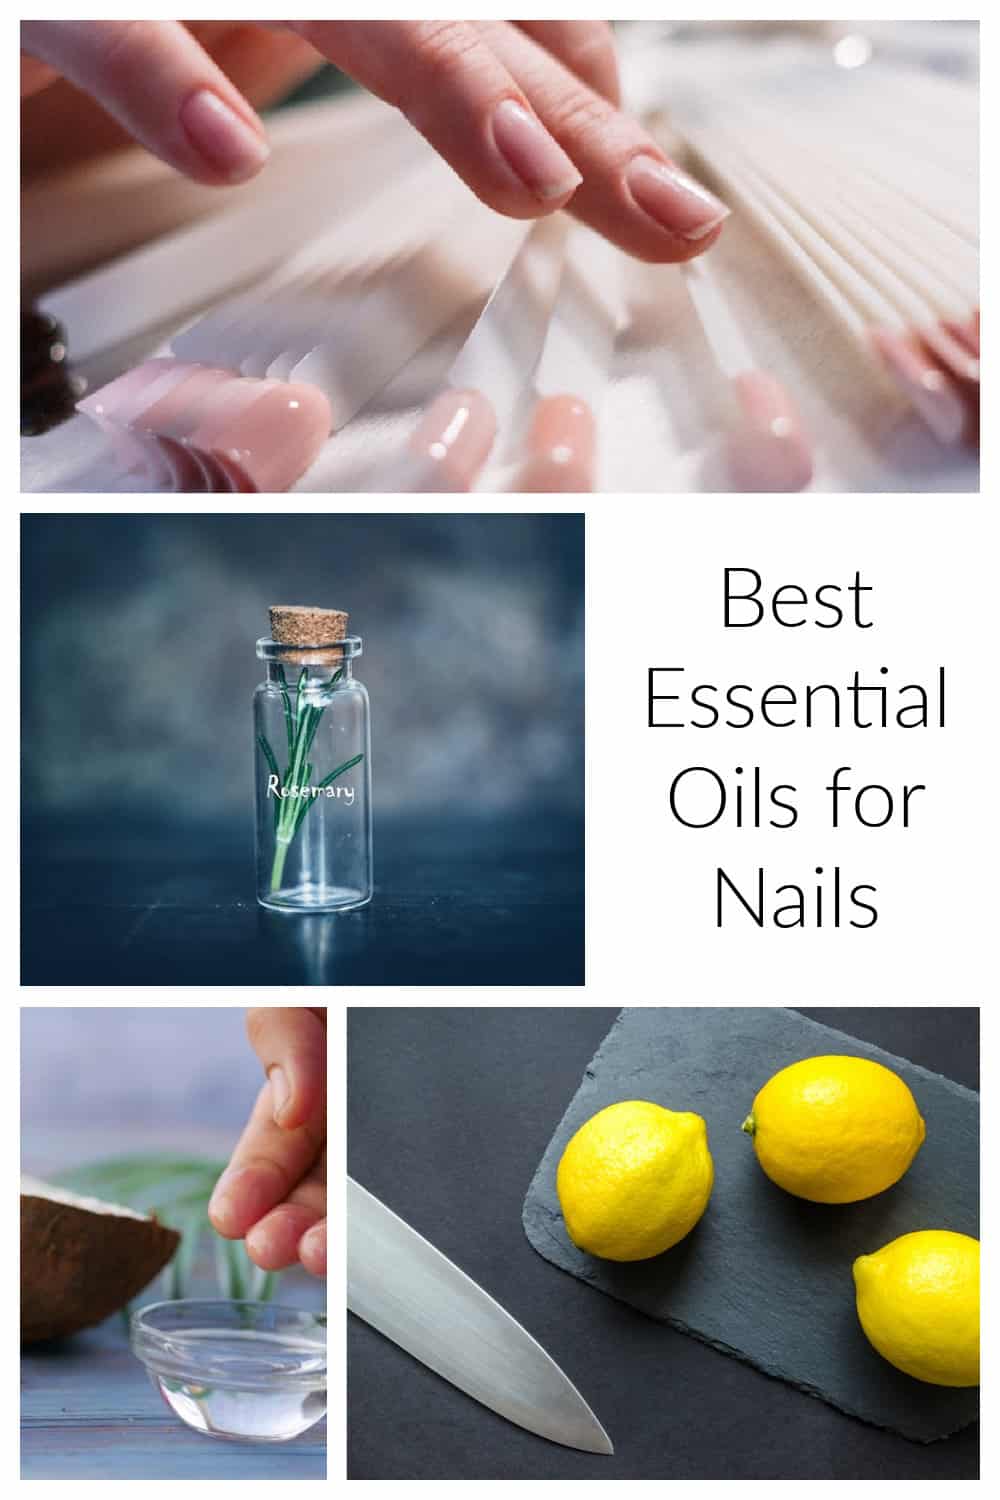 Check out the best essential oils for nails and learn which EOs help improve healthy nail growth. Get your nails and cuticles in the best condition with these tips.